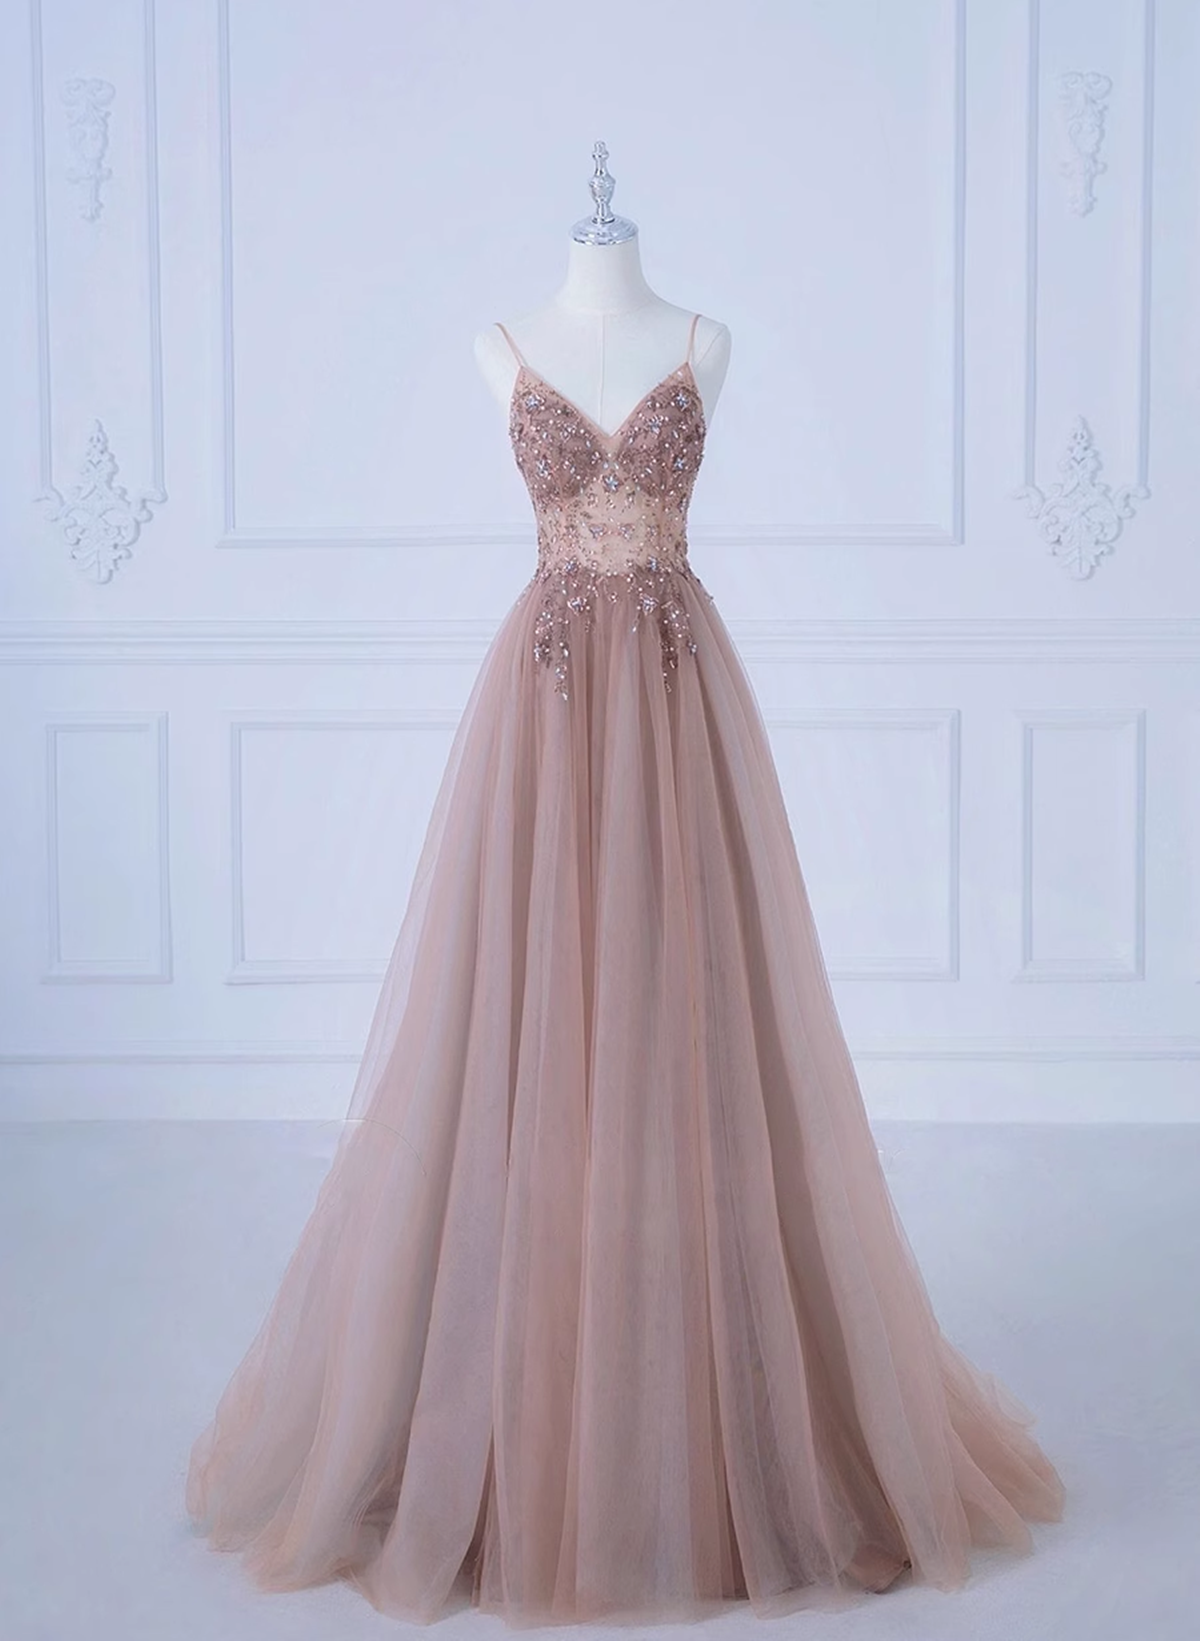 Pink V-Neckline Beaded Straps Long Party Dress Outfits For Girls, A-Line Pink Tulle Floor Length Prom Dress